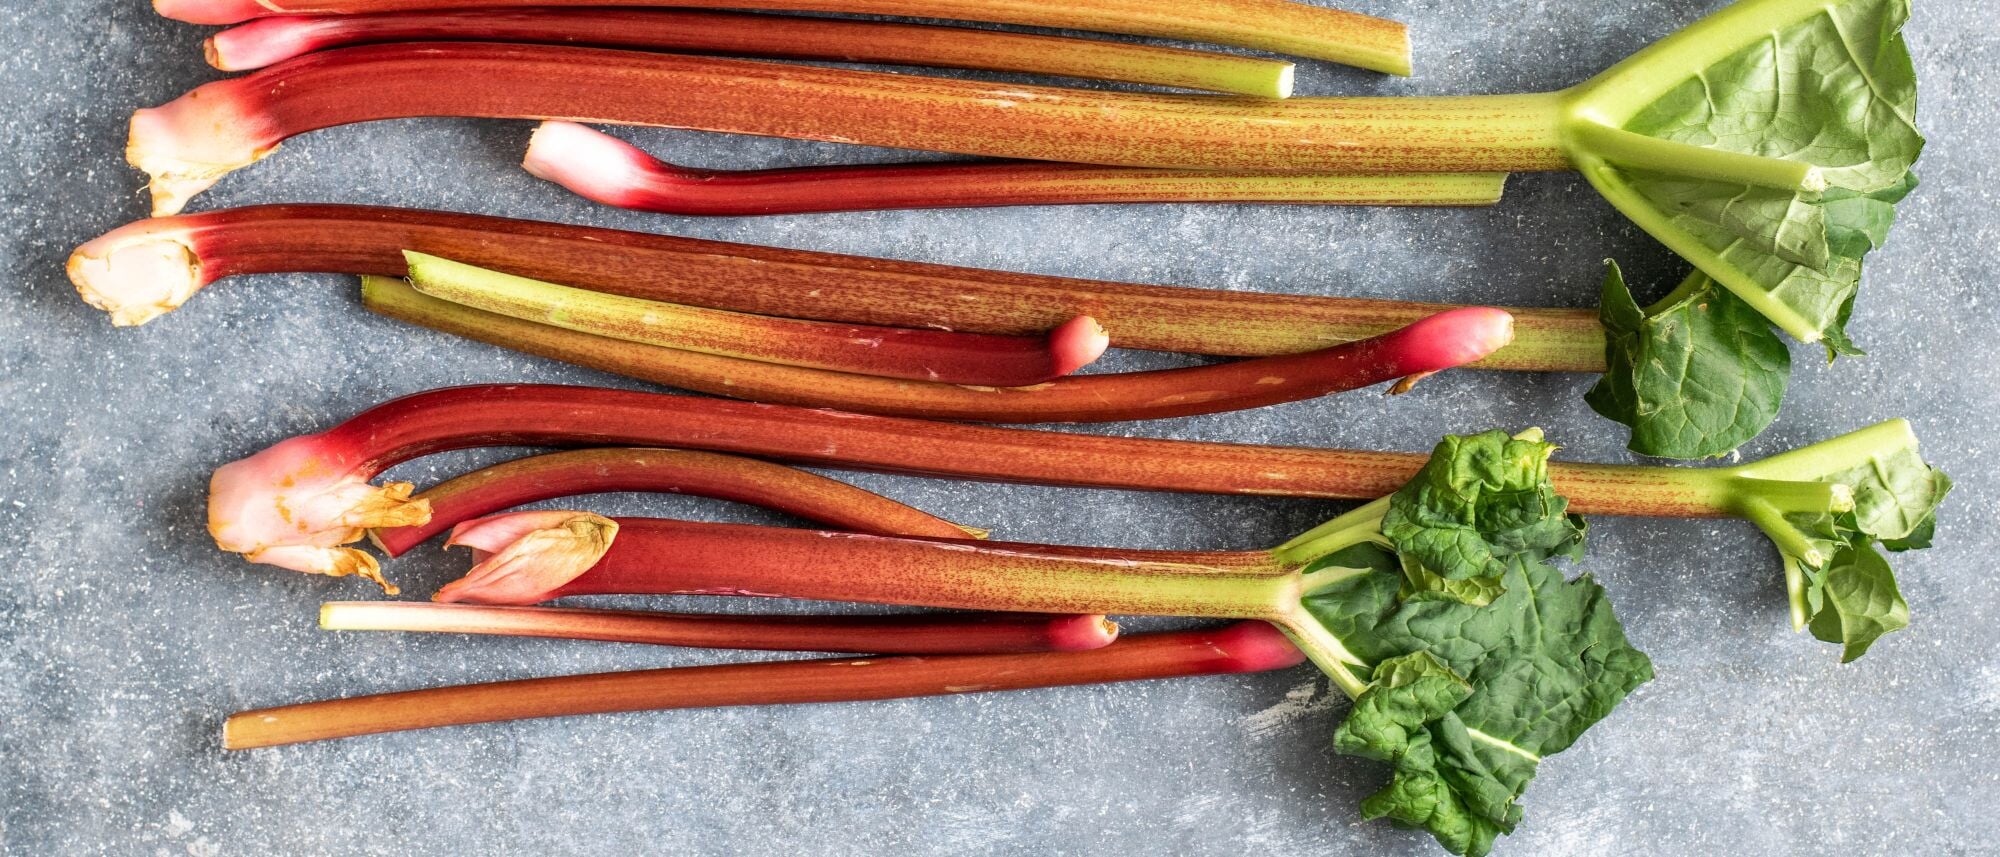 Grow rhubarb in your home garden for attractive looking stalks